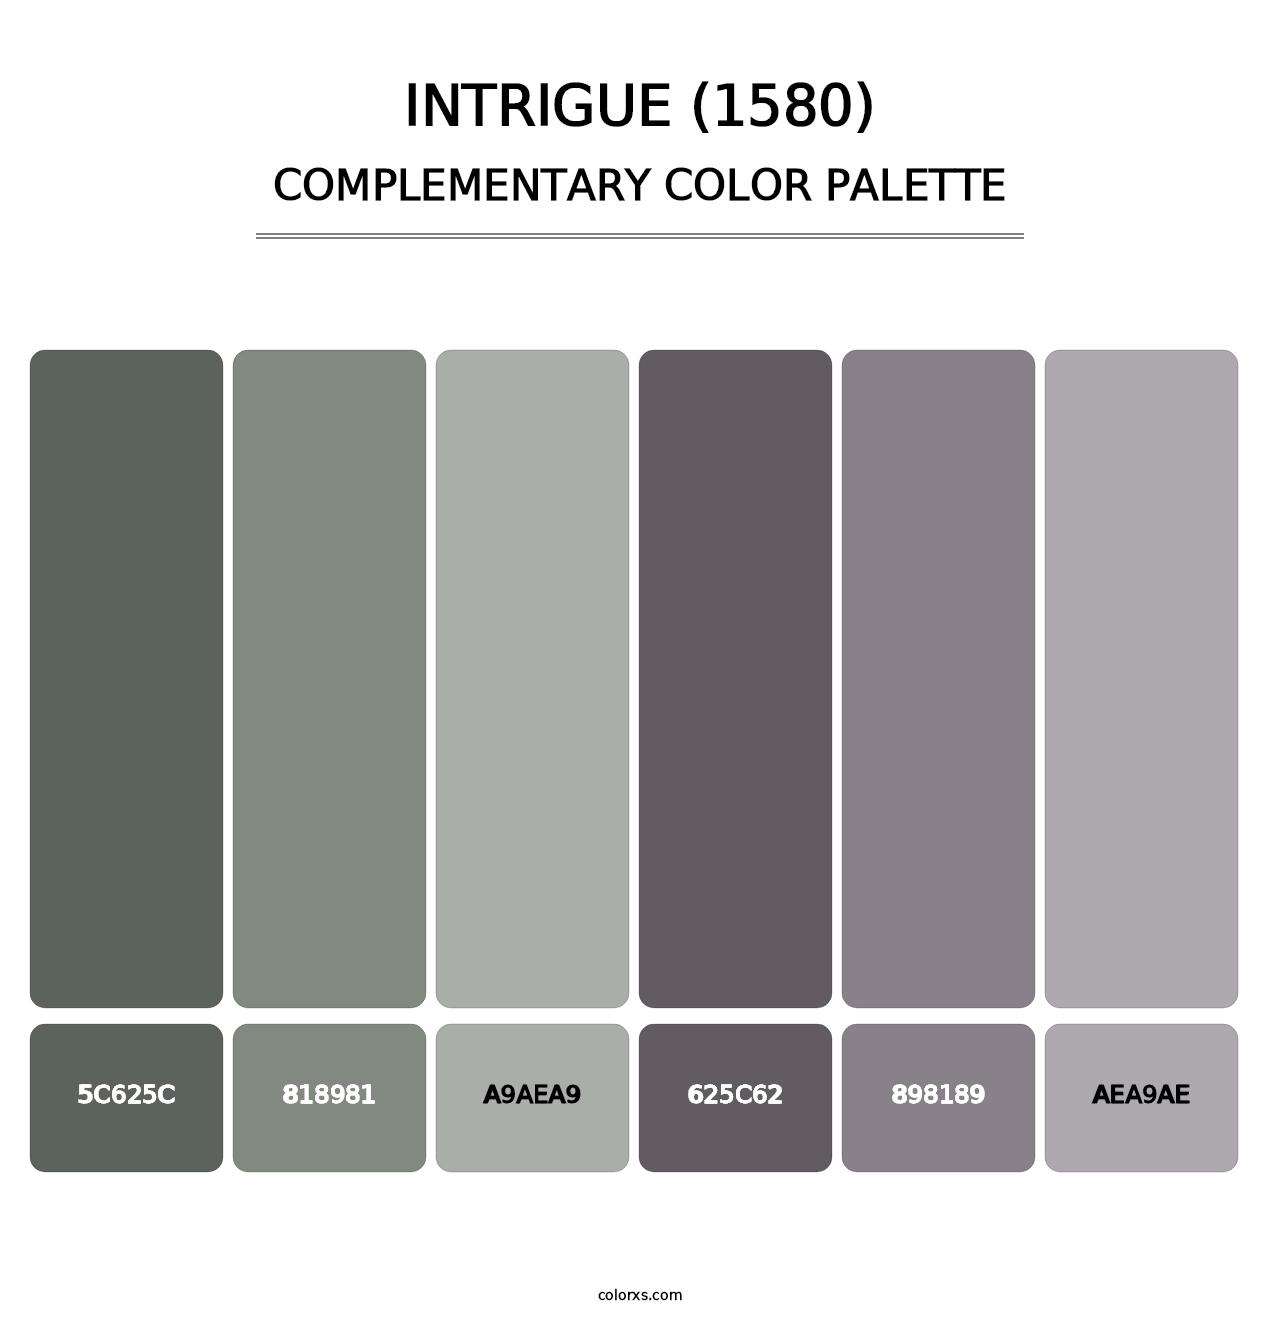 Intrigue (1580) - Complementary Color Palette